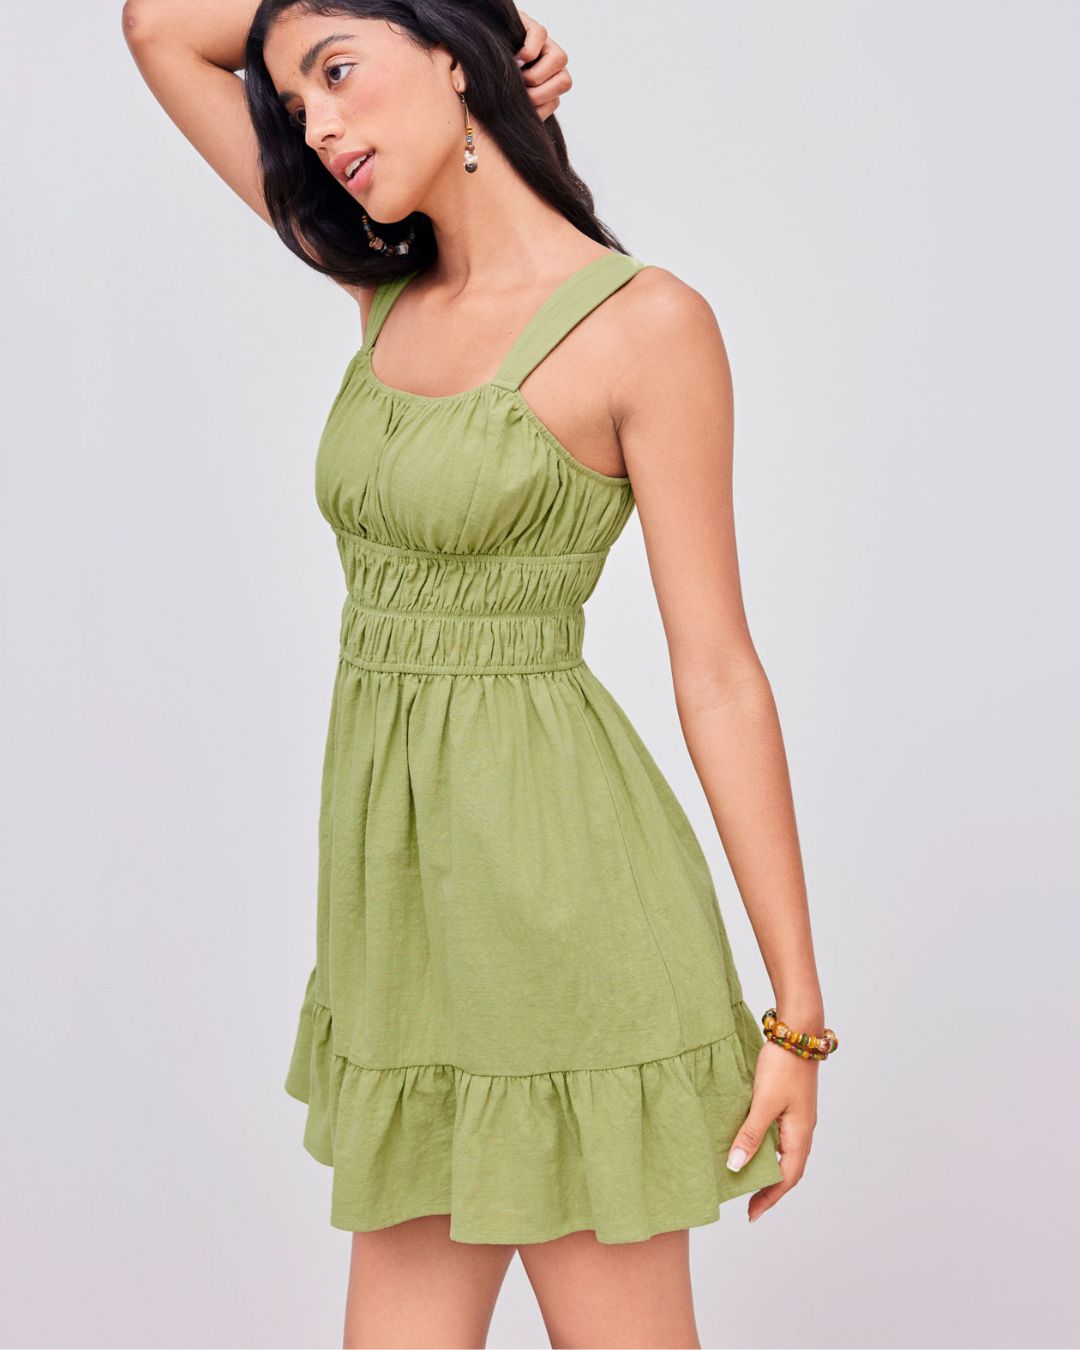 RUCHED FIT AND FLARE DRESS,beach, cotton flex, dresses, fit and flare, green, mini, regular fit, ruched, ruffled, shoulder strap, sleeveless, solid, square neck, vacation, woven,ruched-fit-and-flare-dress-green,Color- Green
Fabric- Cotton Flex
Type- Fit And Flare
Fit- Regular Fit
Length- Mini
Neck- Square Neck
Sleeve- Sleeveless
Straps- Shoulder Strap
Print- Solid
Details- Ruched Bodice